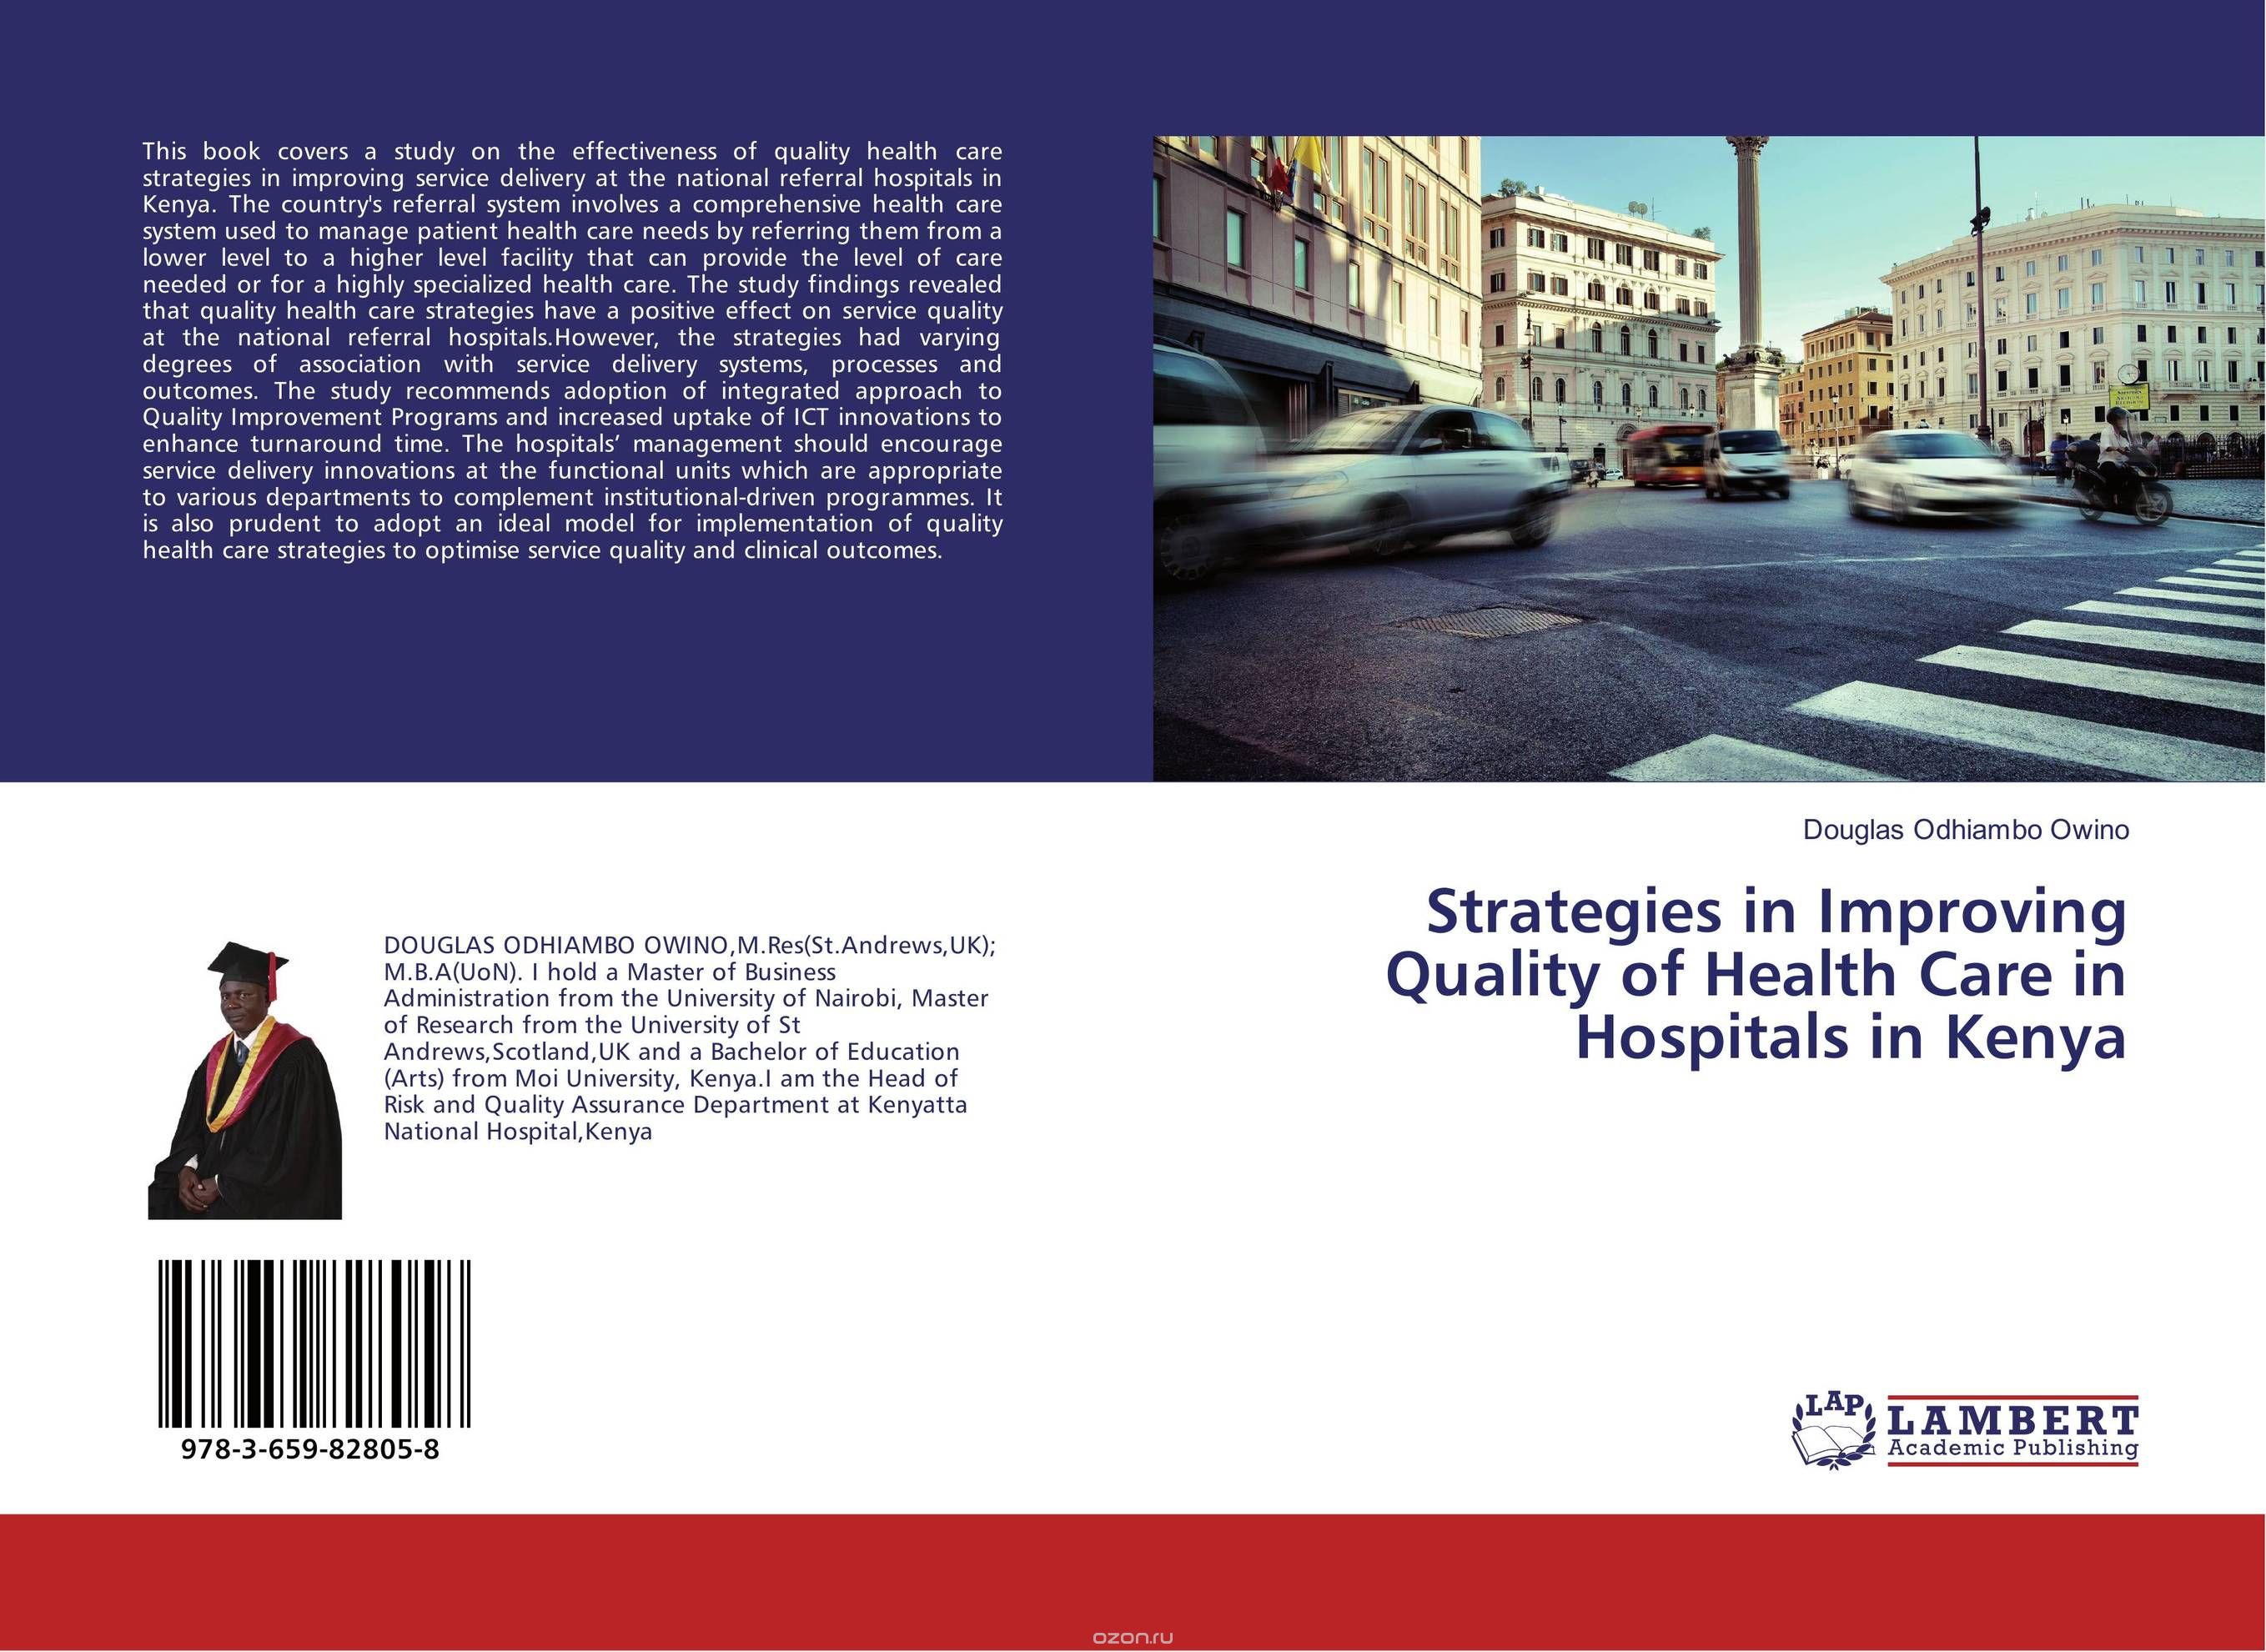 Strategies in Improving Quality of Health Care in Hospitals in Kenya